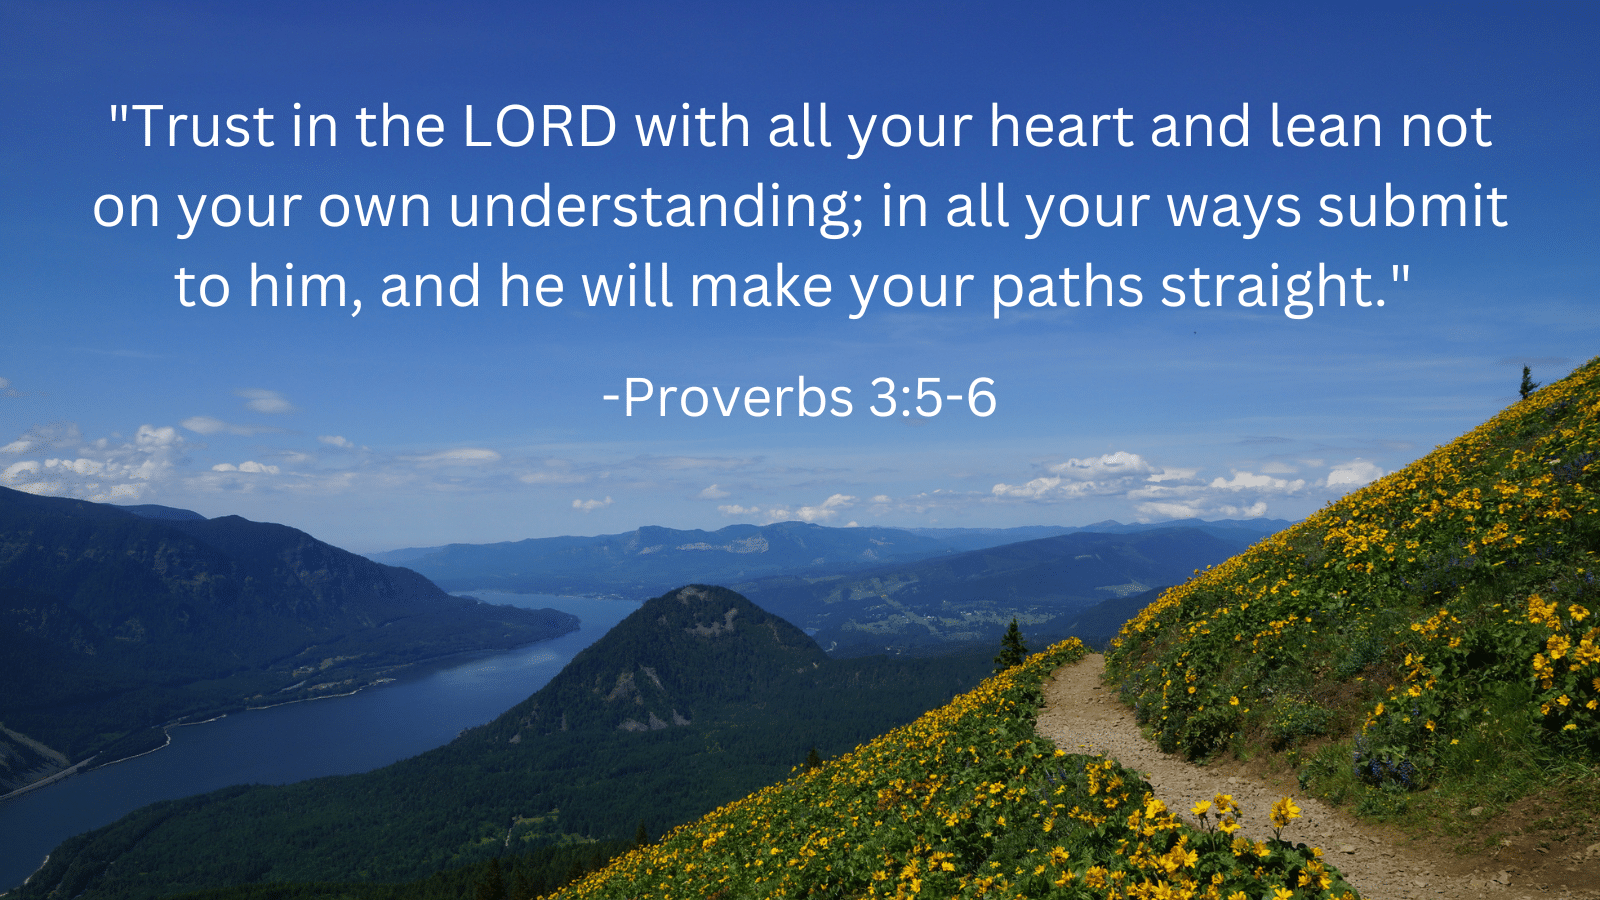 Hillside Outside and path with Proverbs 3:5-6